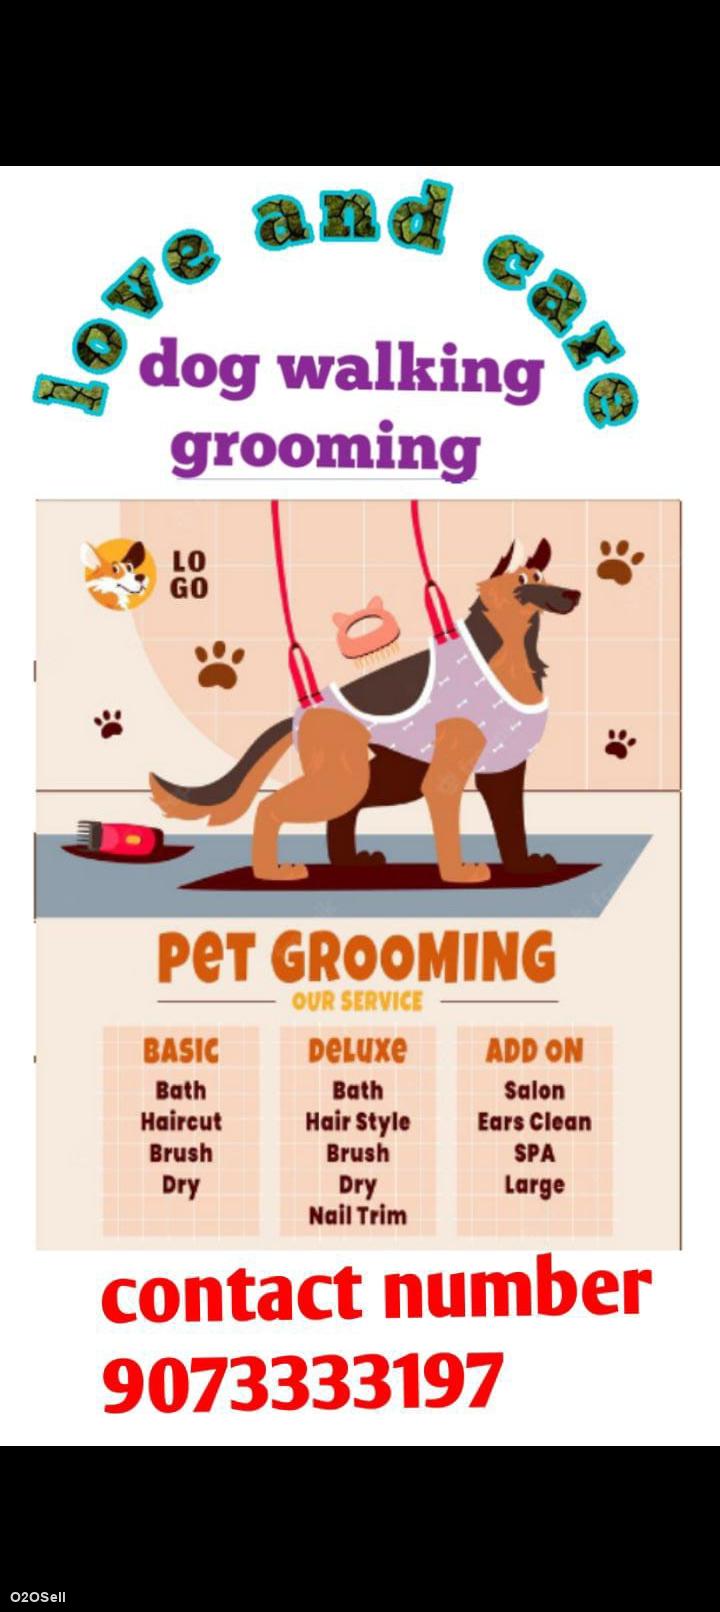 Love and care dog walking grooming and boarding  - Profile Image